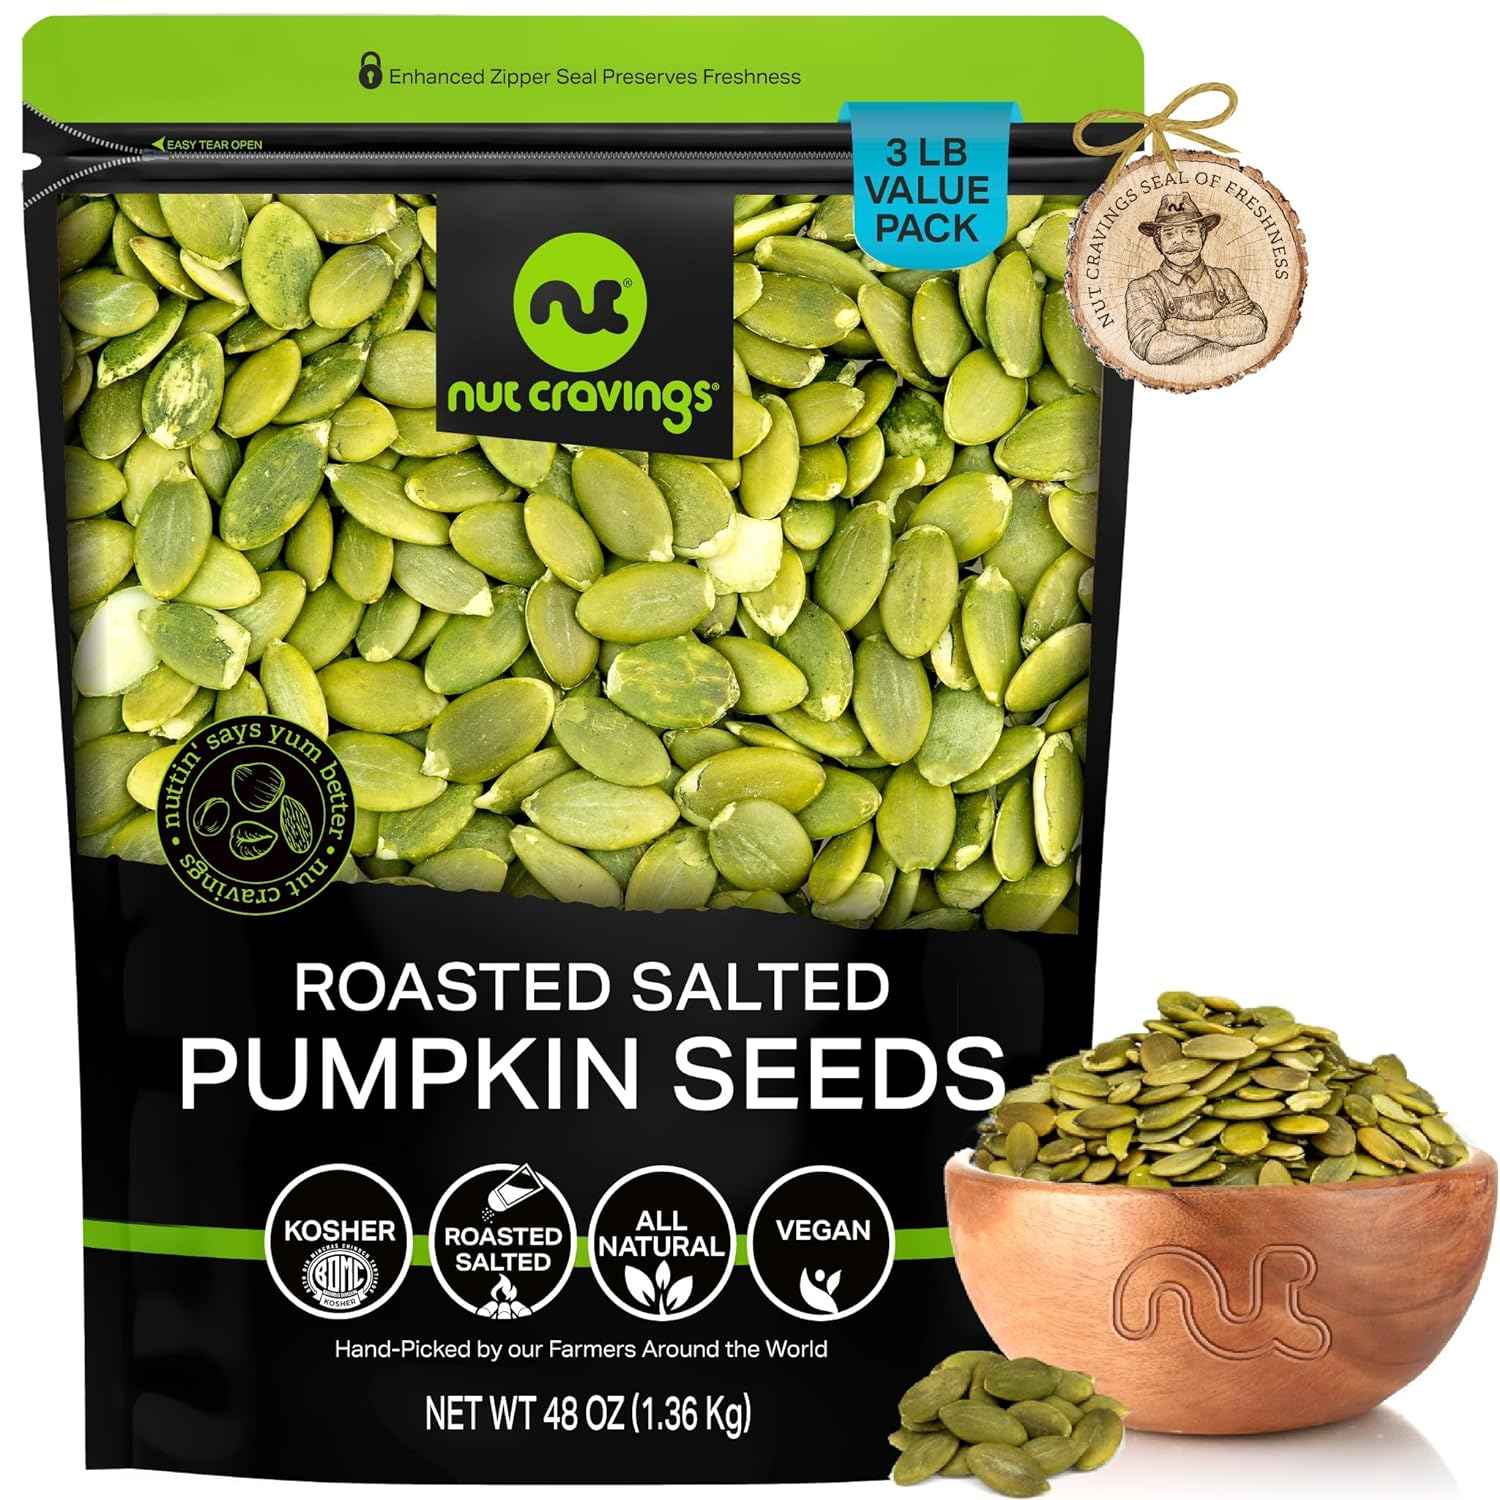 Nut Cravings - Roasted & Salted Pumpkin Seeds, Pepitas, No Shell (48oz - 3 LB) Packed Fresh in Resealable Bag - Nut Snack - Healthy Protein Food, All Natural, Keto Friendly, Vegan, Kosher